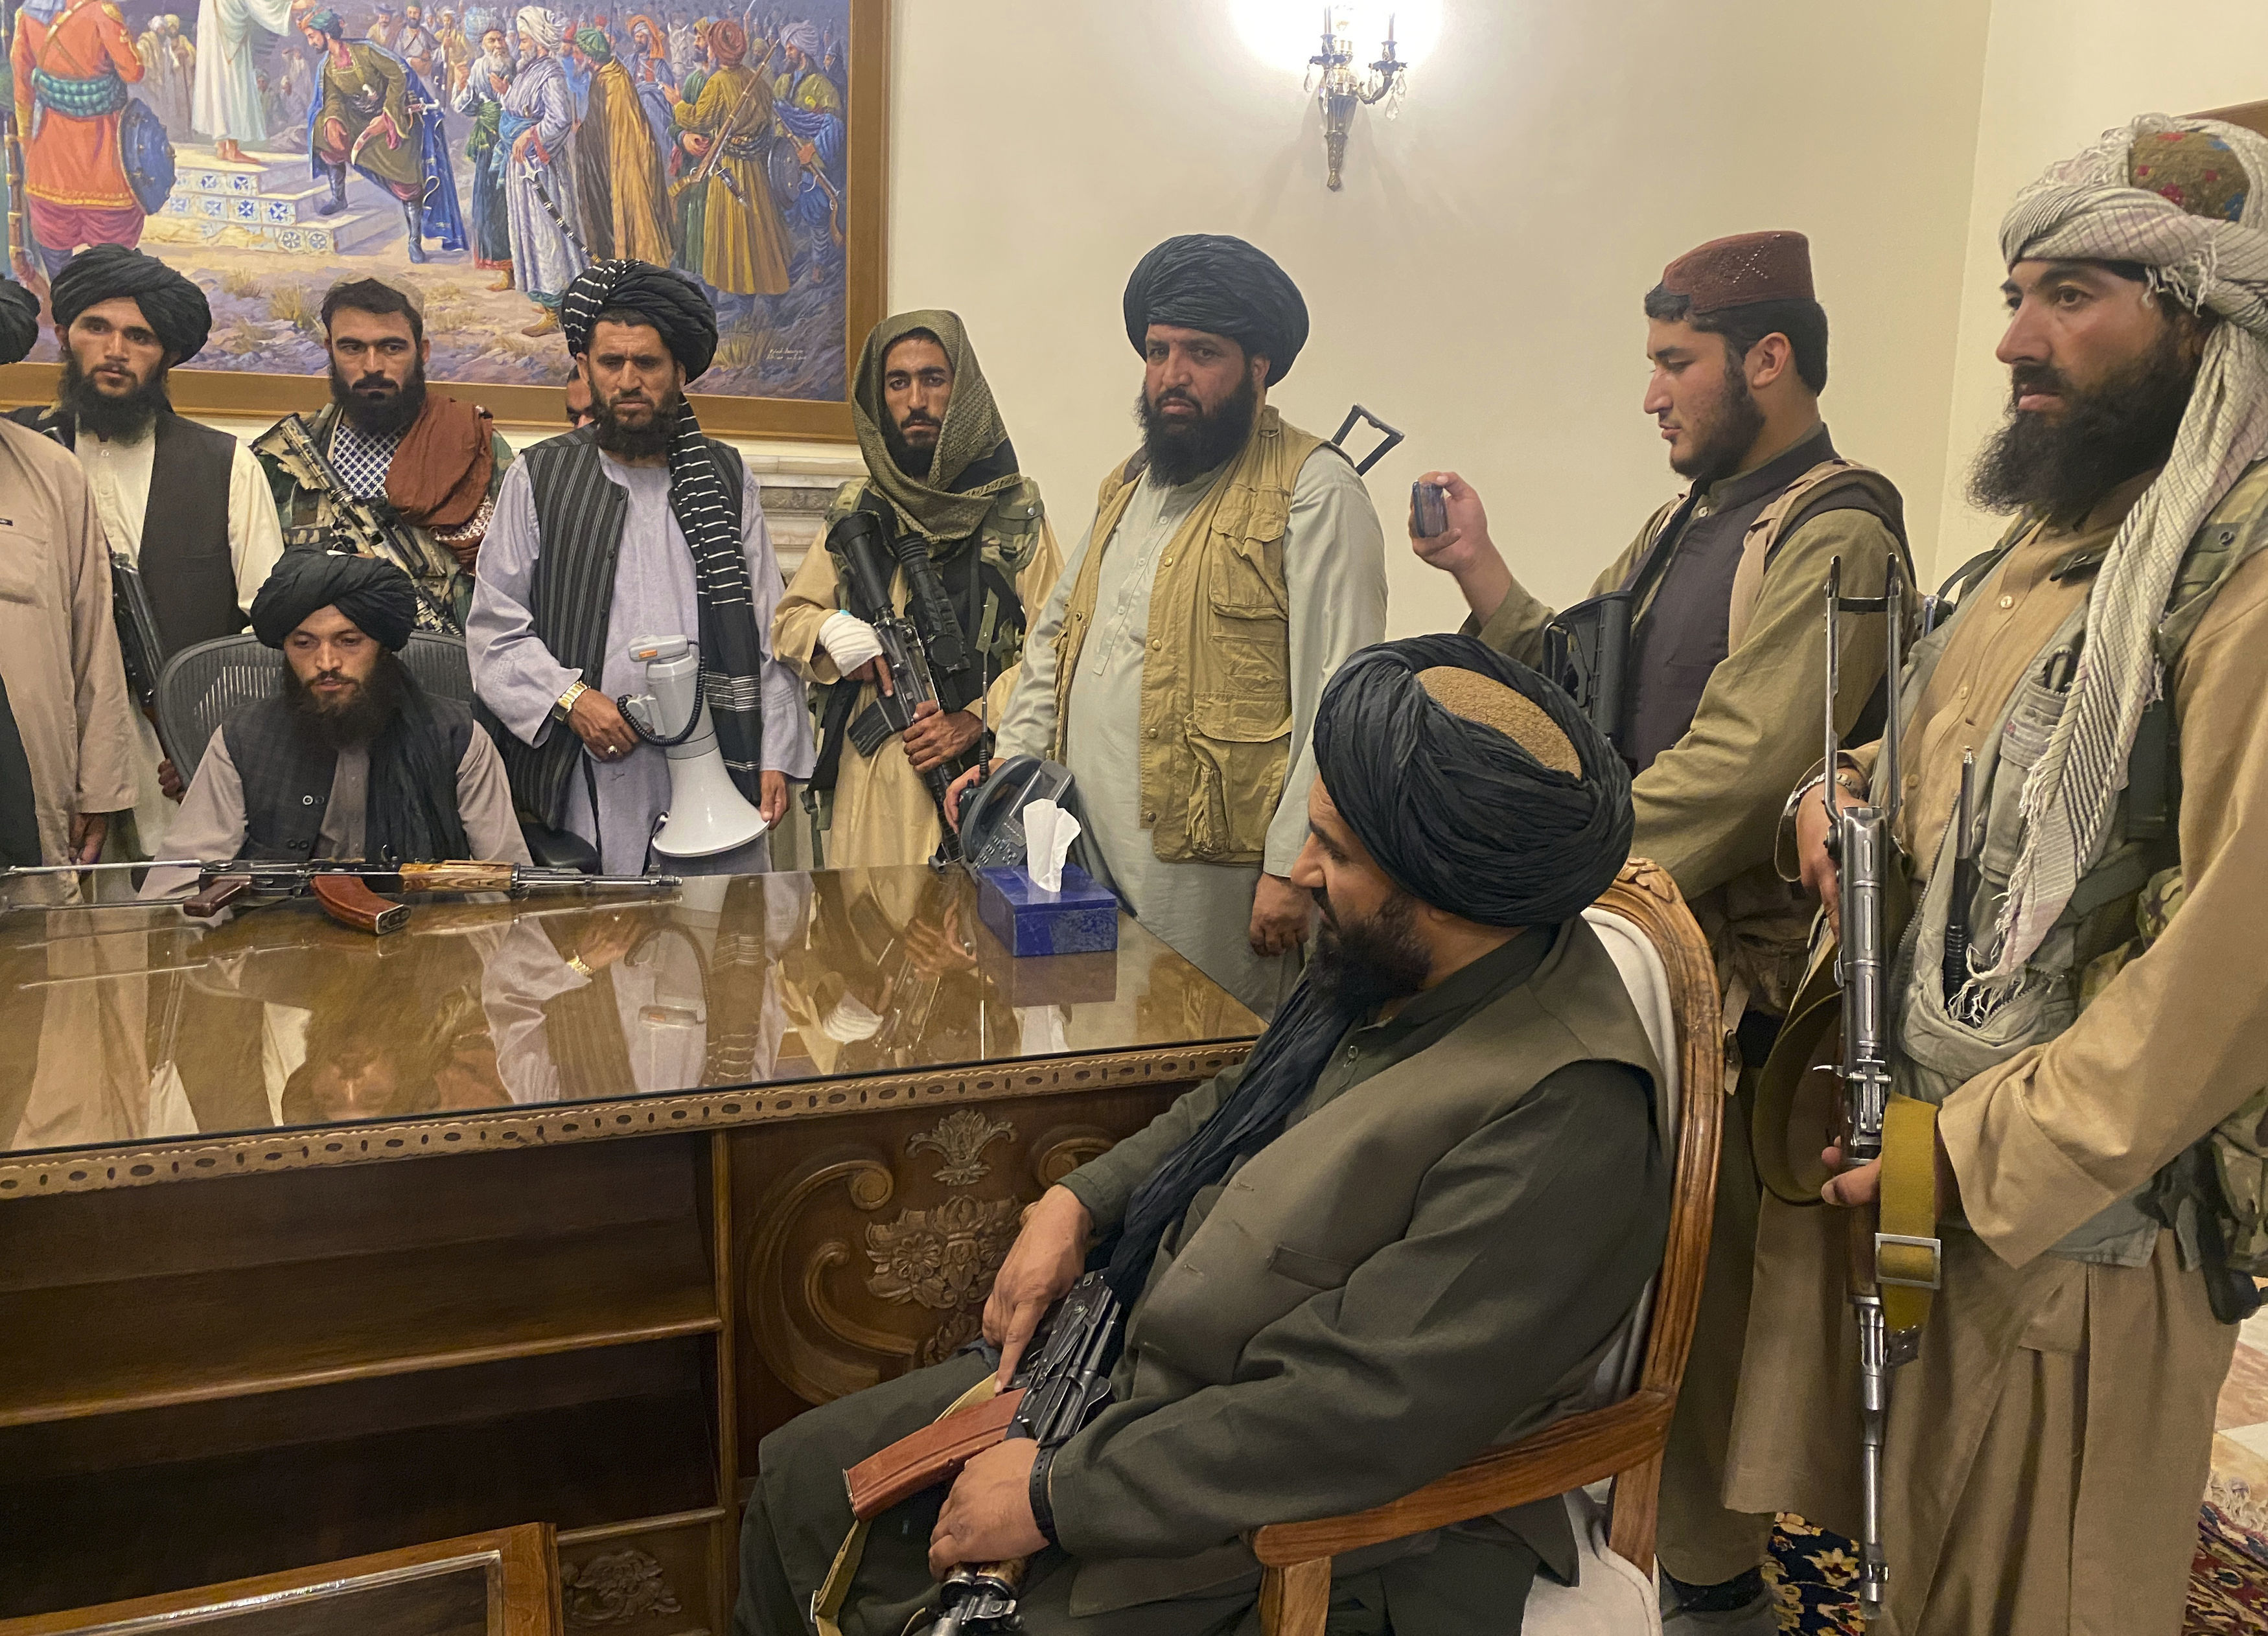 Taliban fighters take control of Afghan presidential palace after the Afghan President Ashraf Ghani fled the country, in Kabul, Afghanistan (Zabi Karimi/AP)